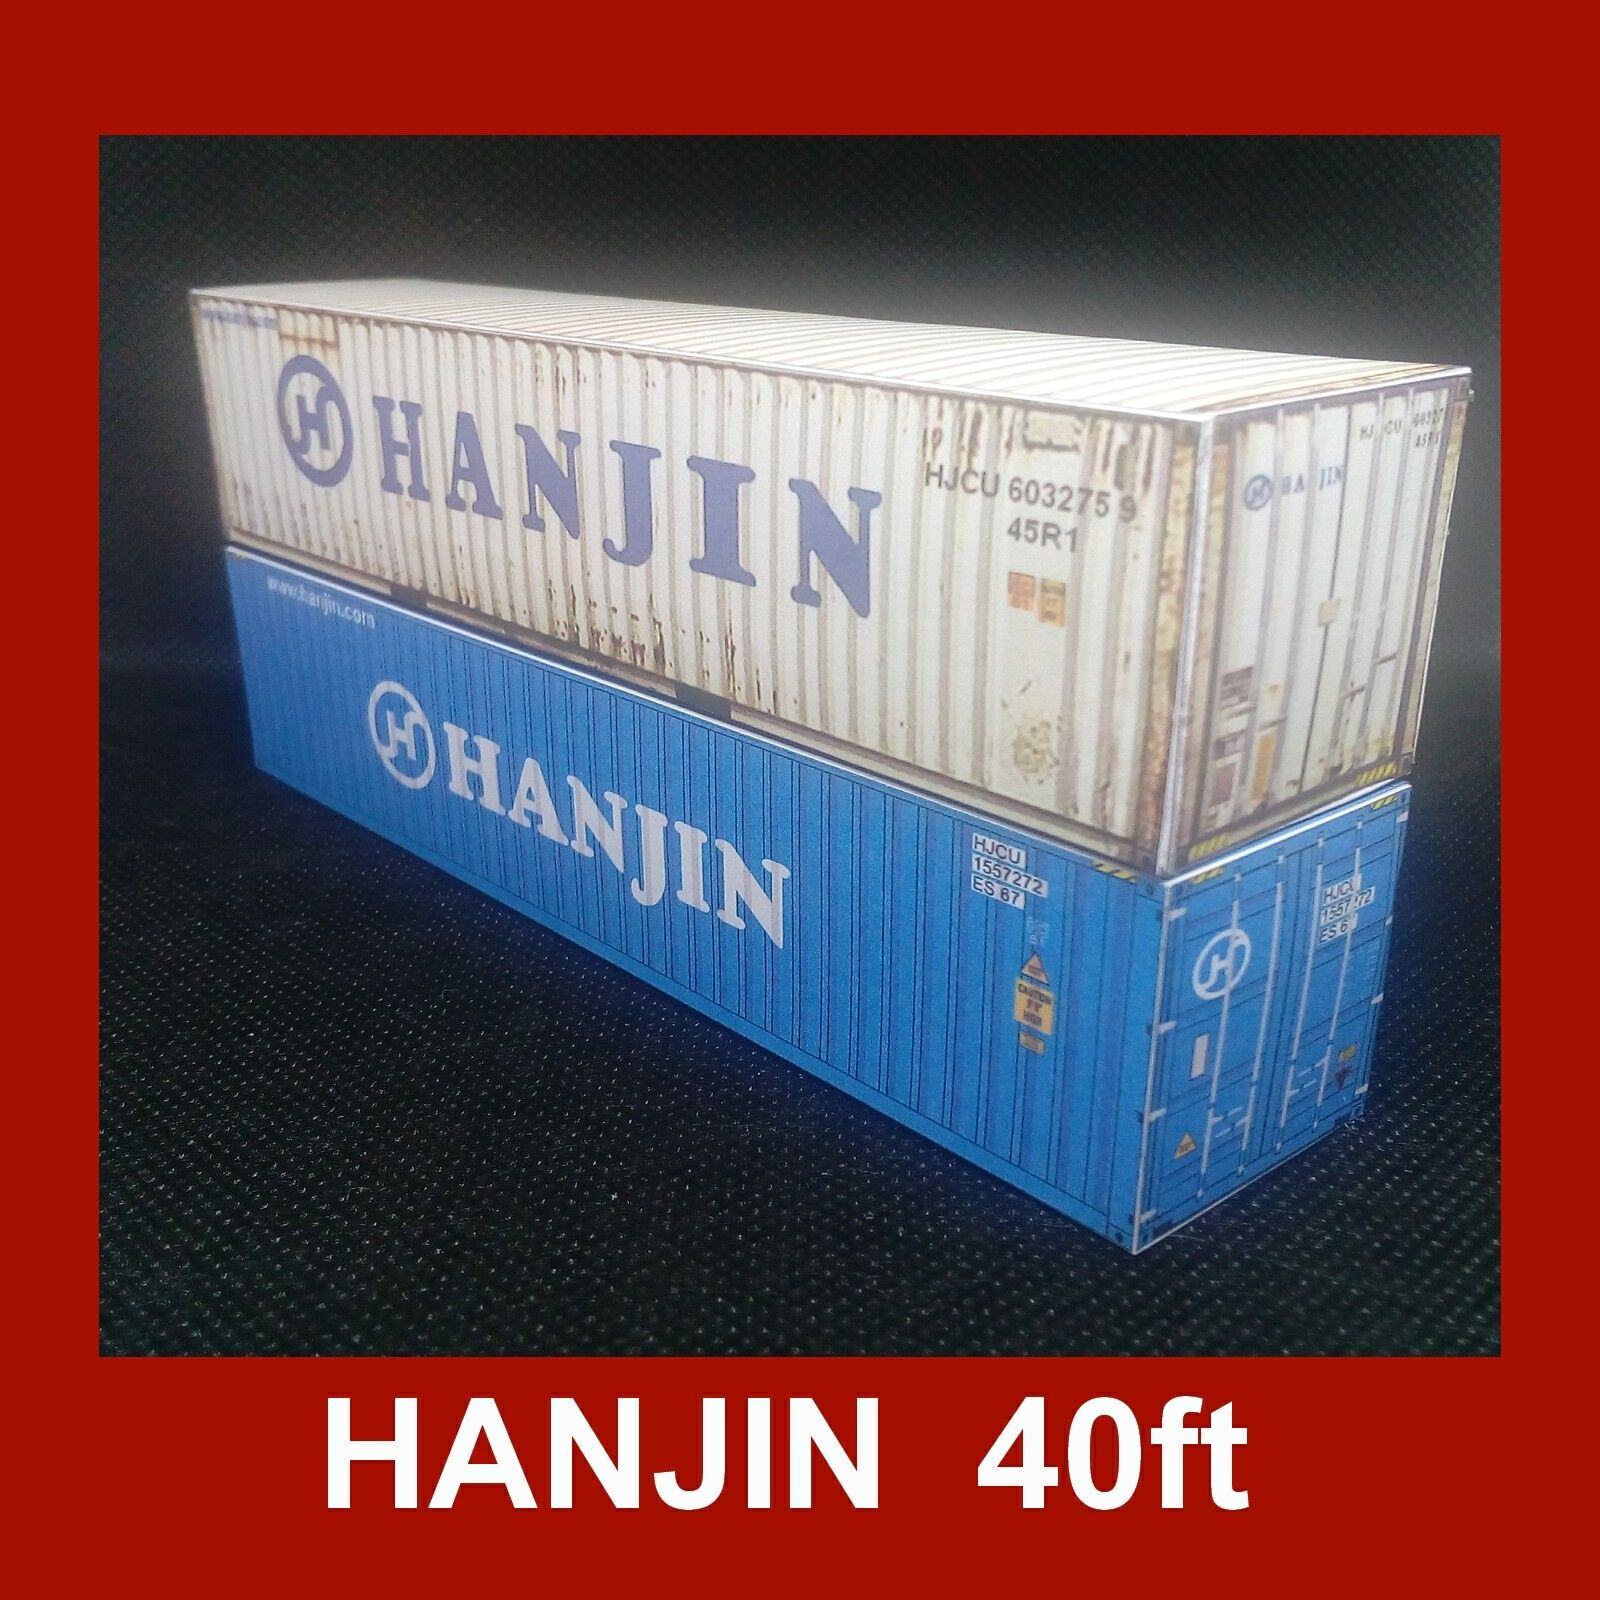 HO FREE Hanjin Collection Shipping Card Kit 40ft Pre-Weathered Gauge x 7